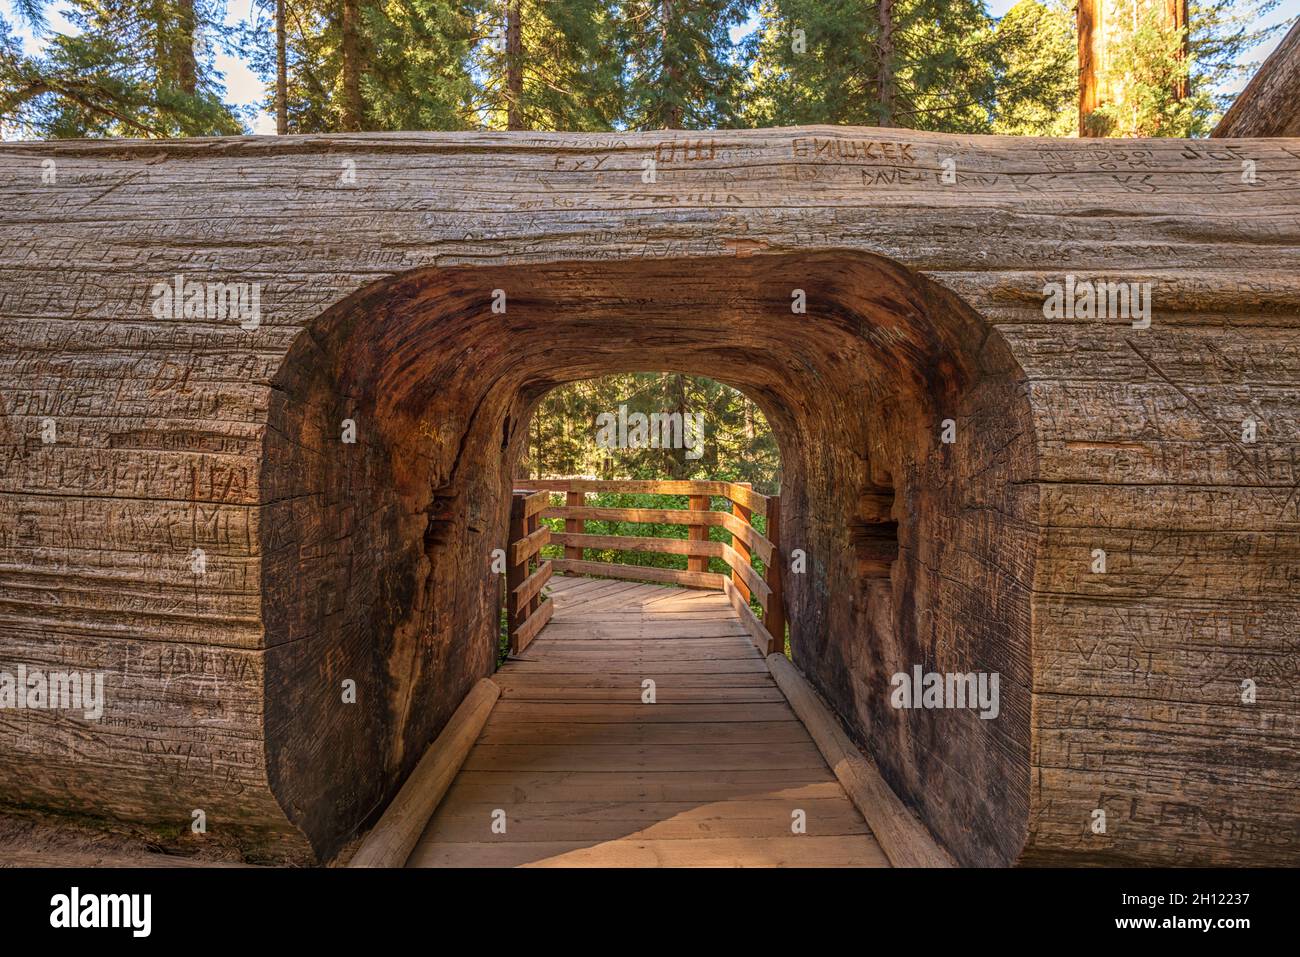 A walk through giant redwood tree at Sequoia National Park. Tulare County, CA, USA. Stock Photo